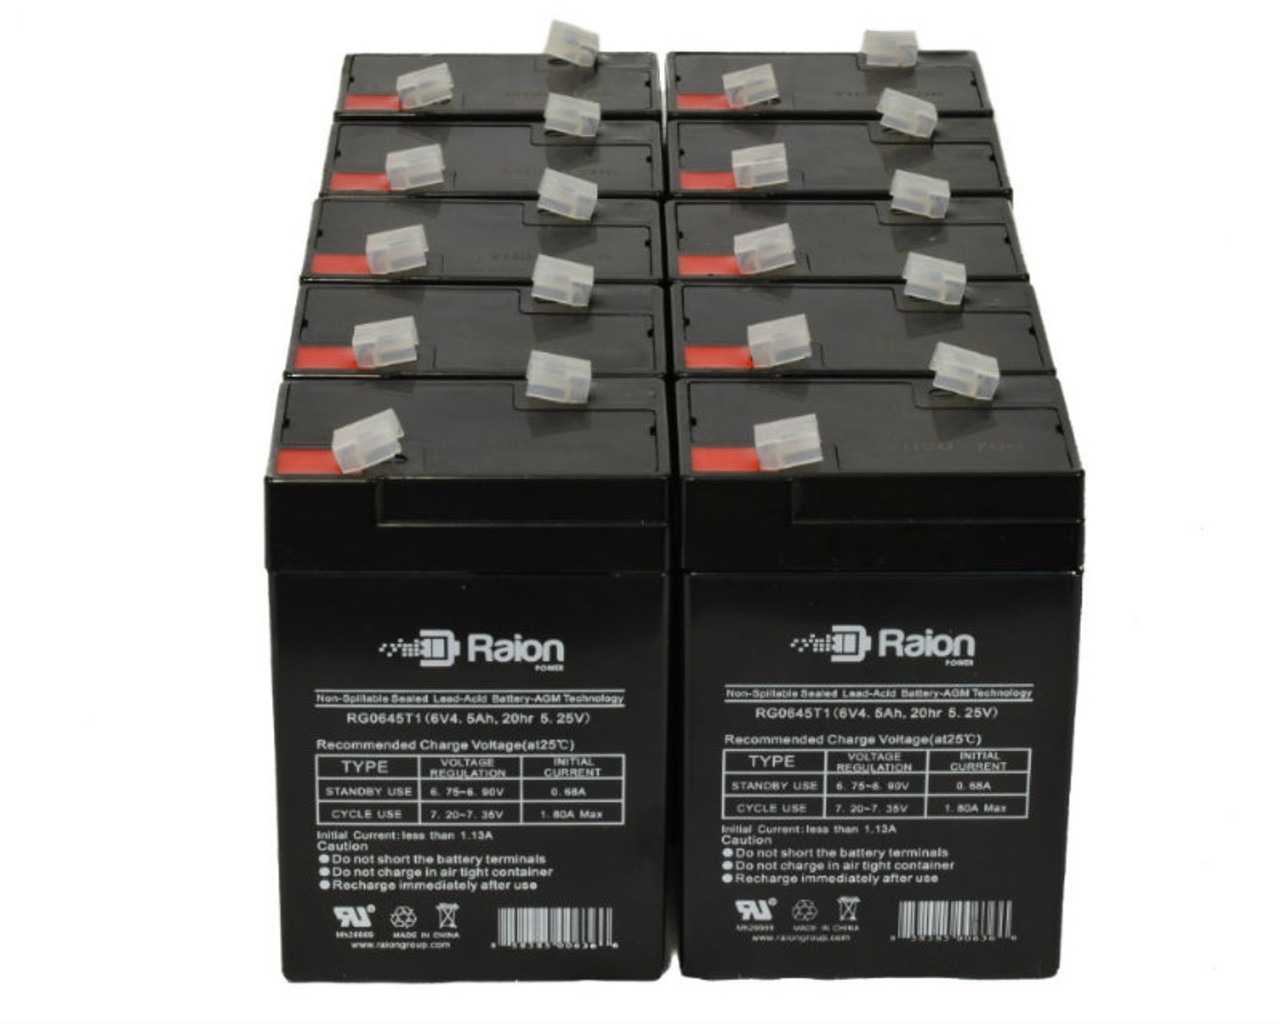 Raion Power 6V 4.5Ah Replacement Emergency Light Battery for GS Portalac PE46RF3CL - 10 Pack